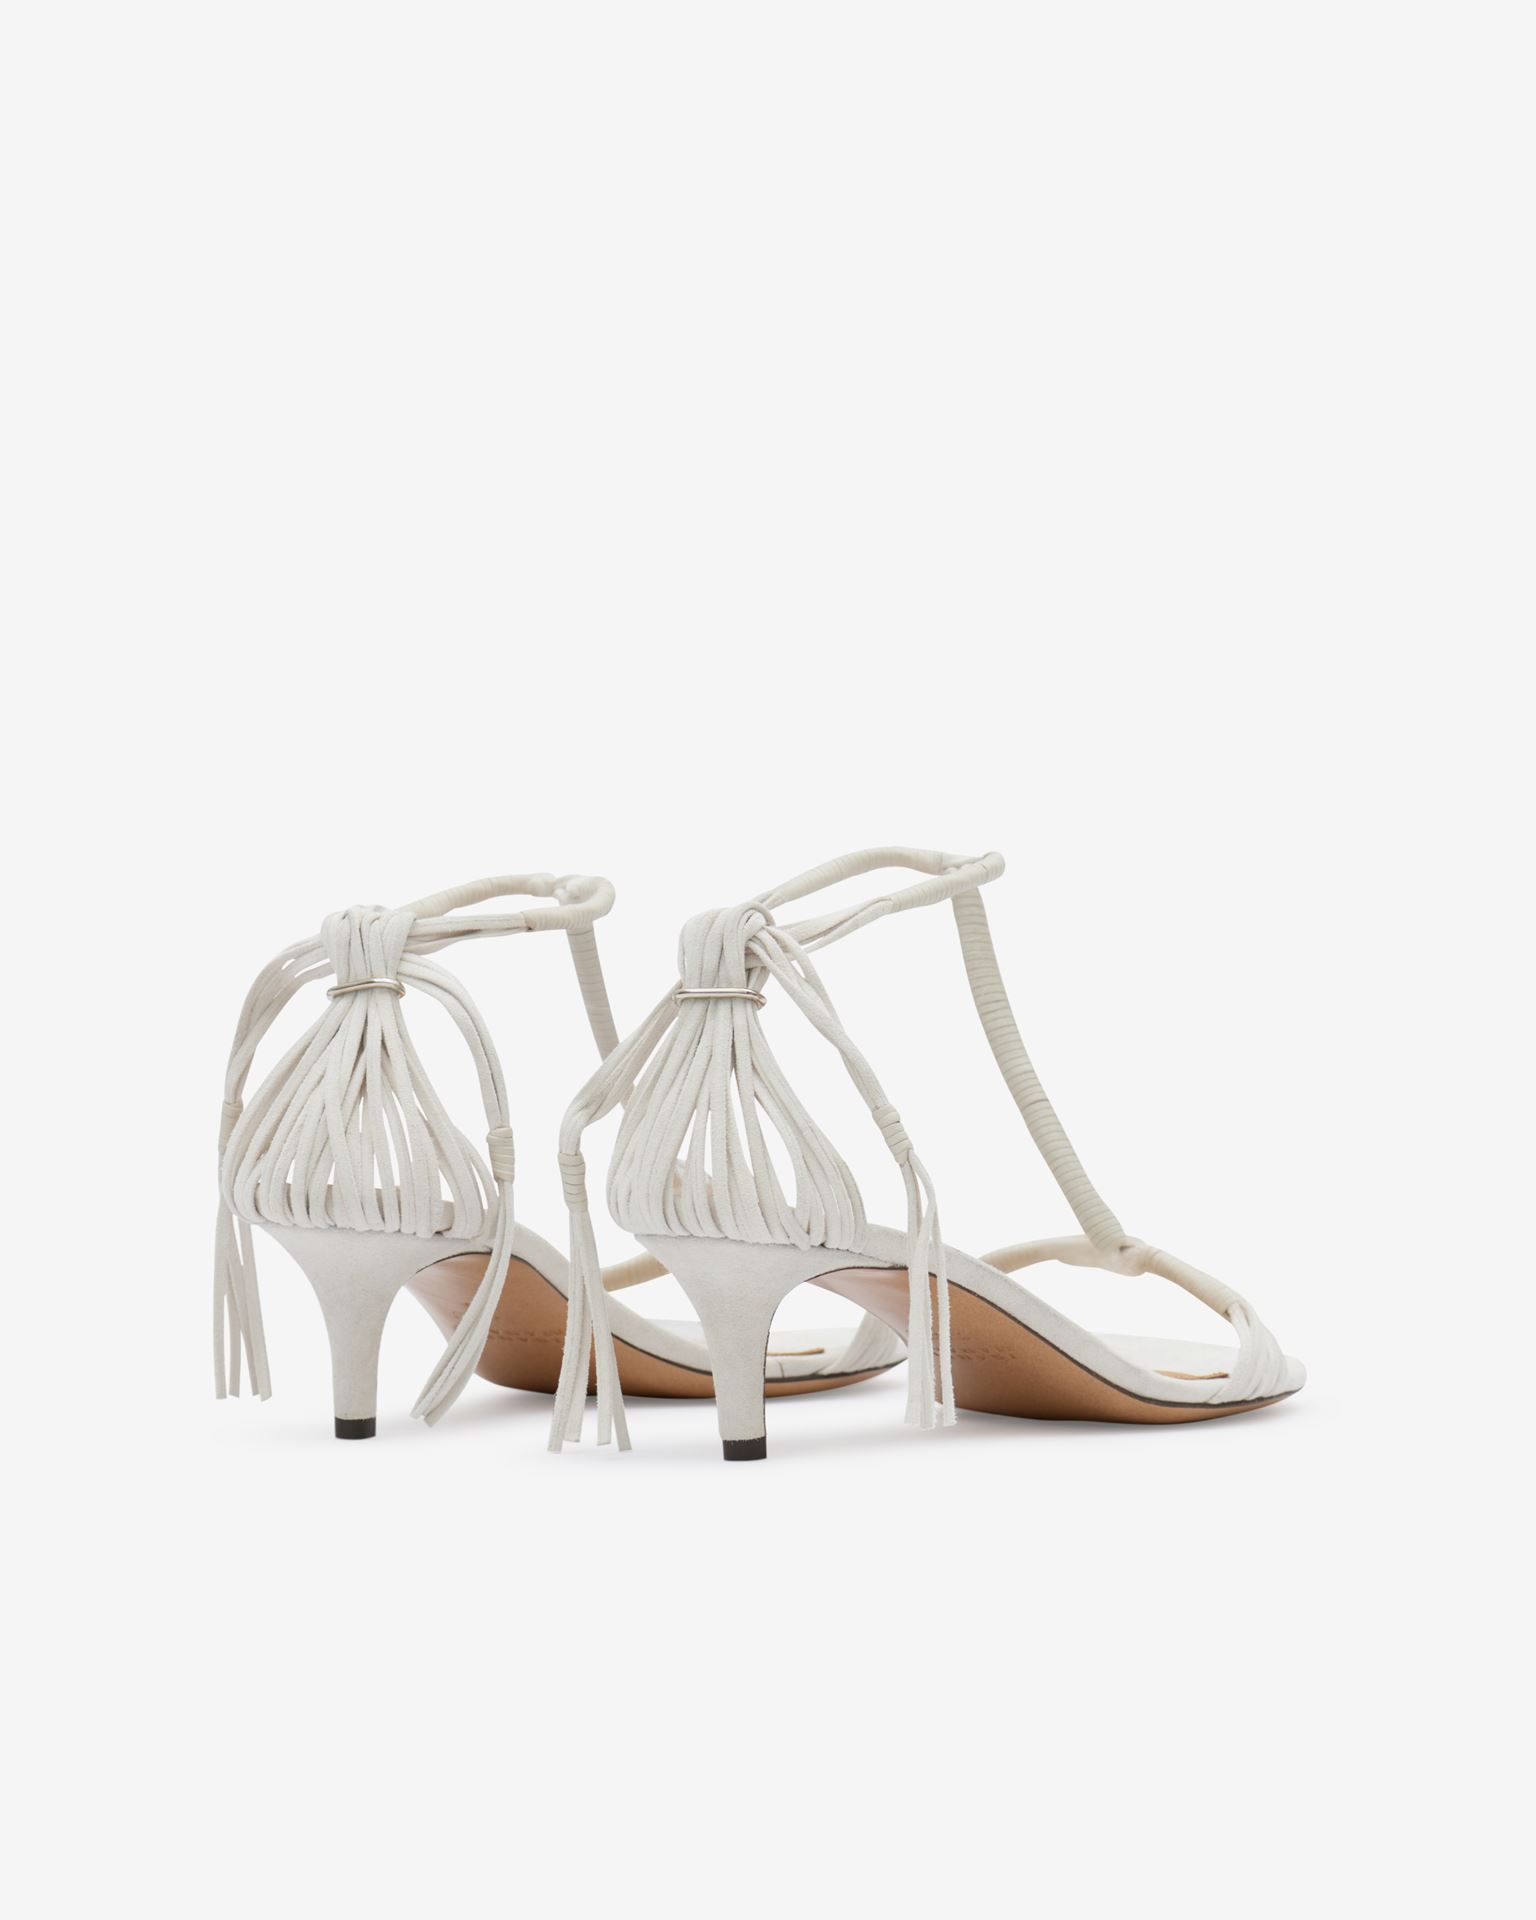 Isabel Marant, Aatos Suede Leather Sandals - Women - White